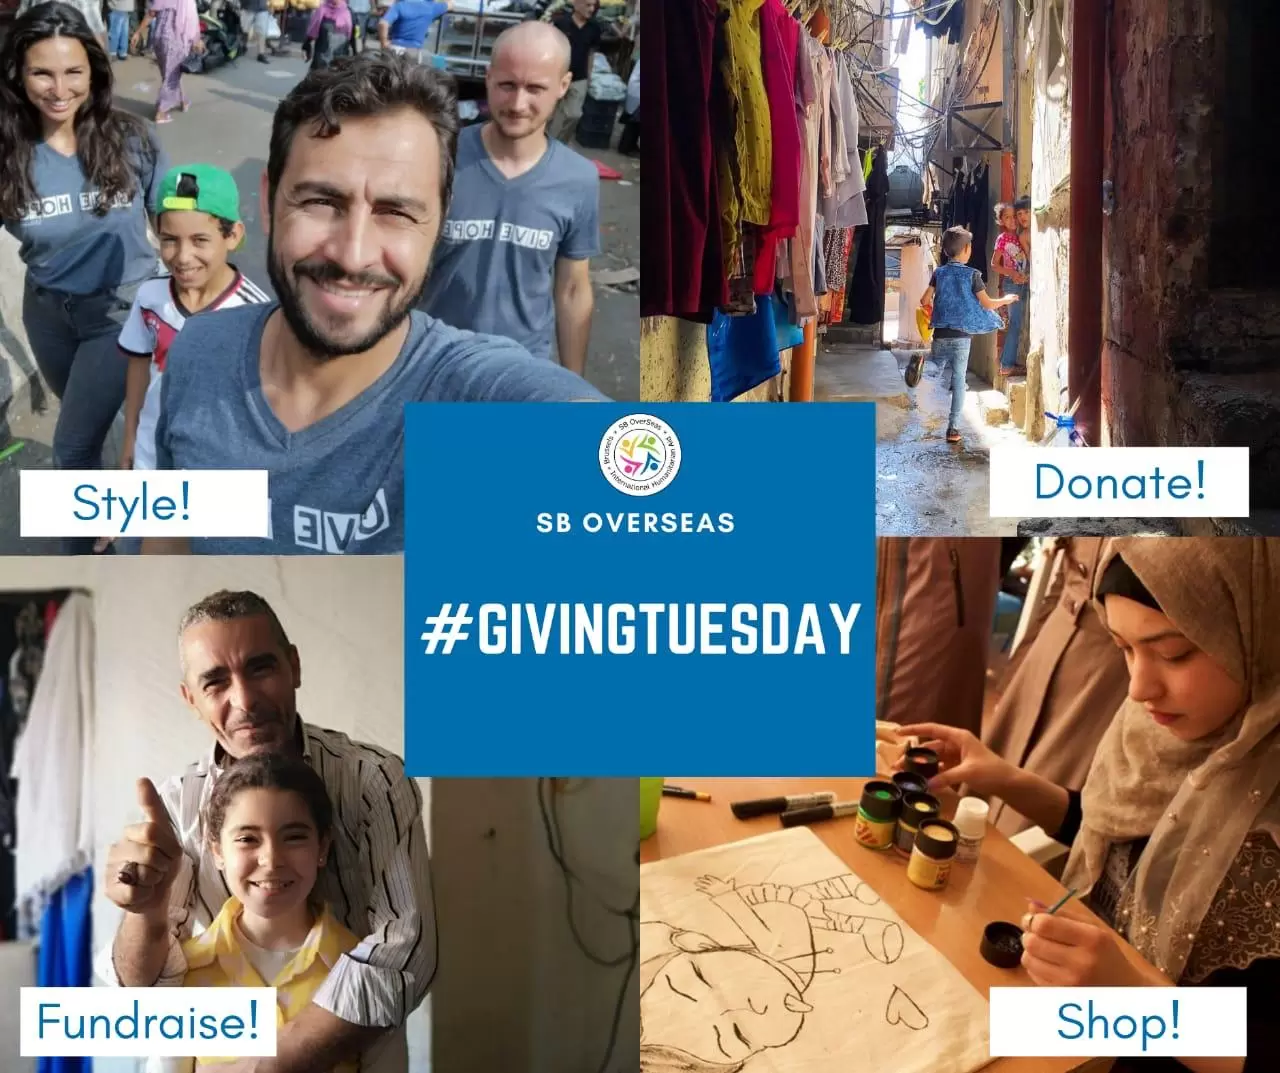 Giving Hope 4 Ways on Giving Tuesday